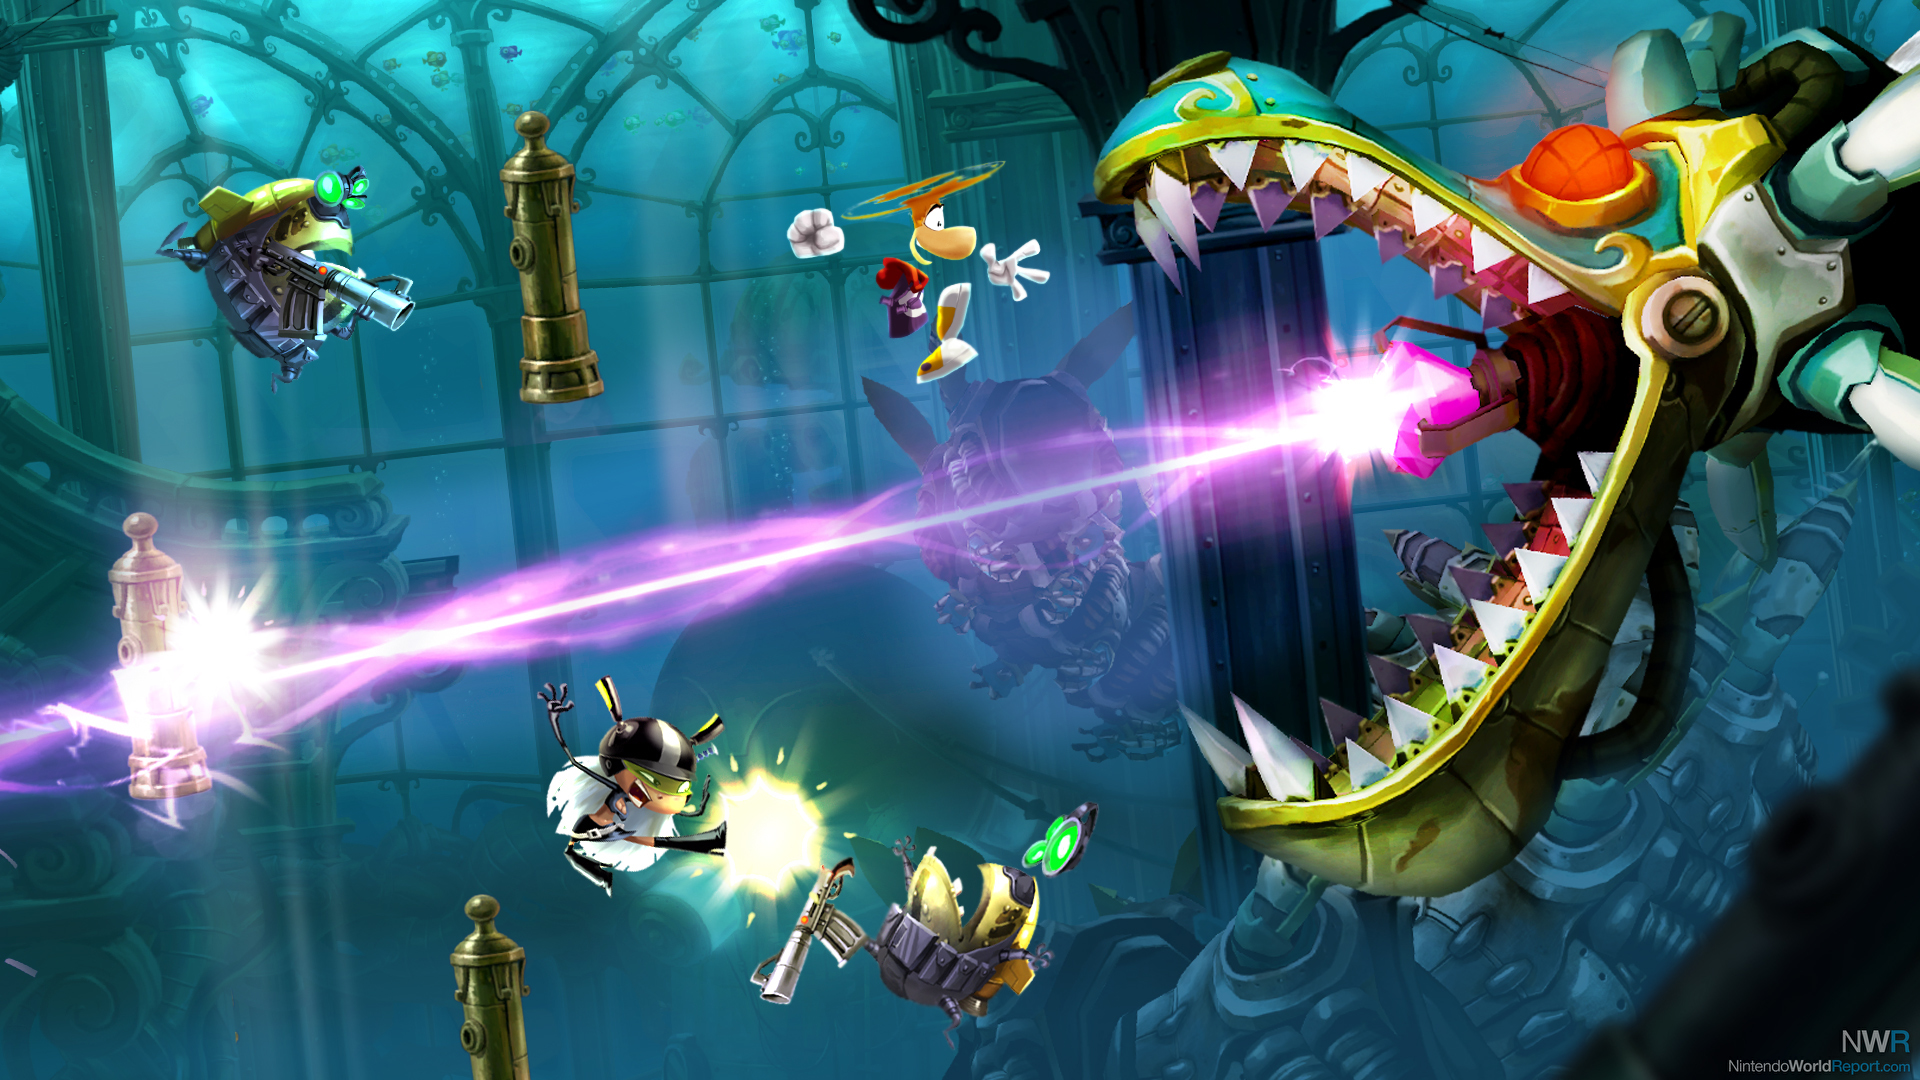 Rayman Legends' review: The game is worth the wait